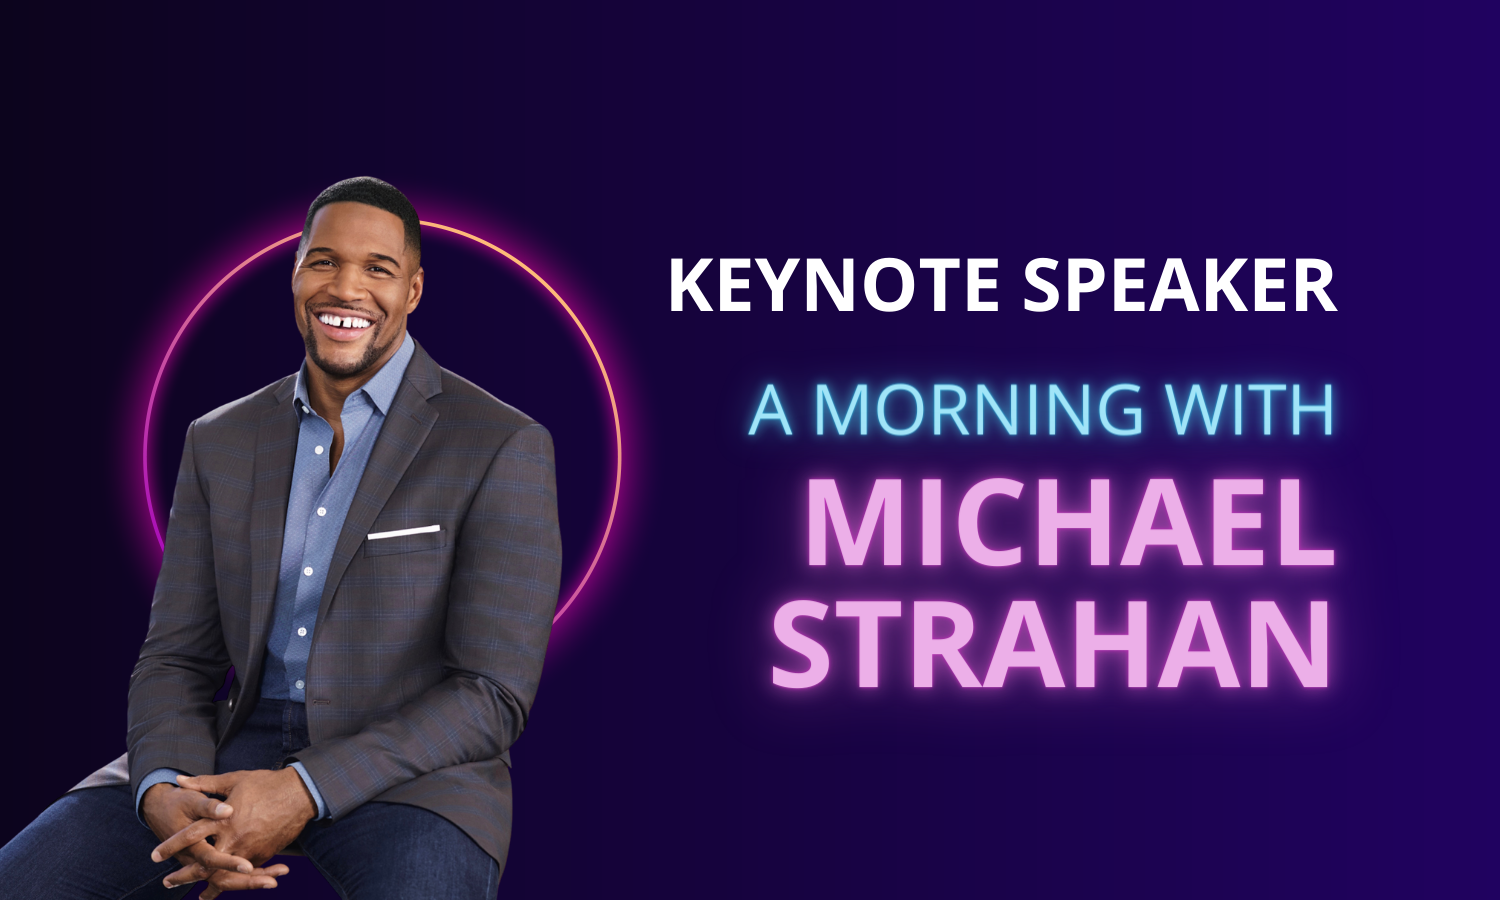 A Morning With Michael Strahan at the Midyear Clinical Meeting & Exhibition